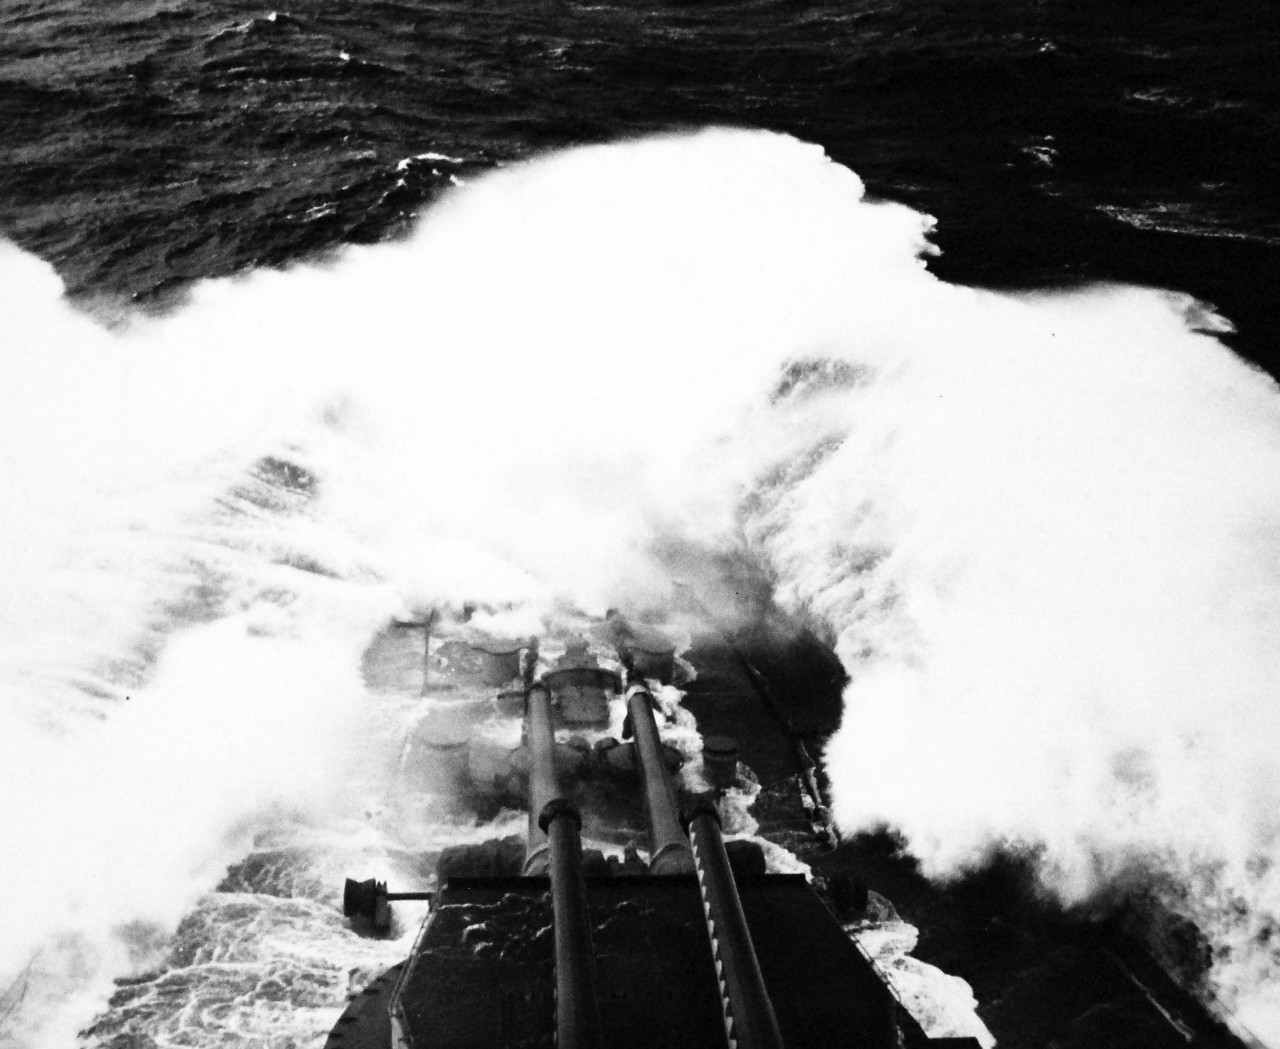 80-G-244235:  Normandy Invasion, U.S. Navy Ships, June 1944.    USS Arkansas (BB 33) takes some heavy water over her foc’sle.    Photograph released September 1, 1944.  Official U.S. Navy photograph, now in the collections of the National Archives.  (2016/10/04).